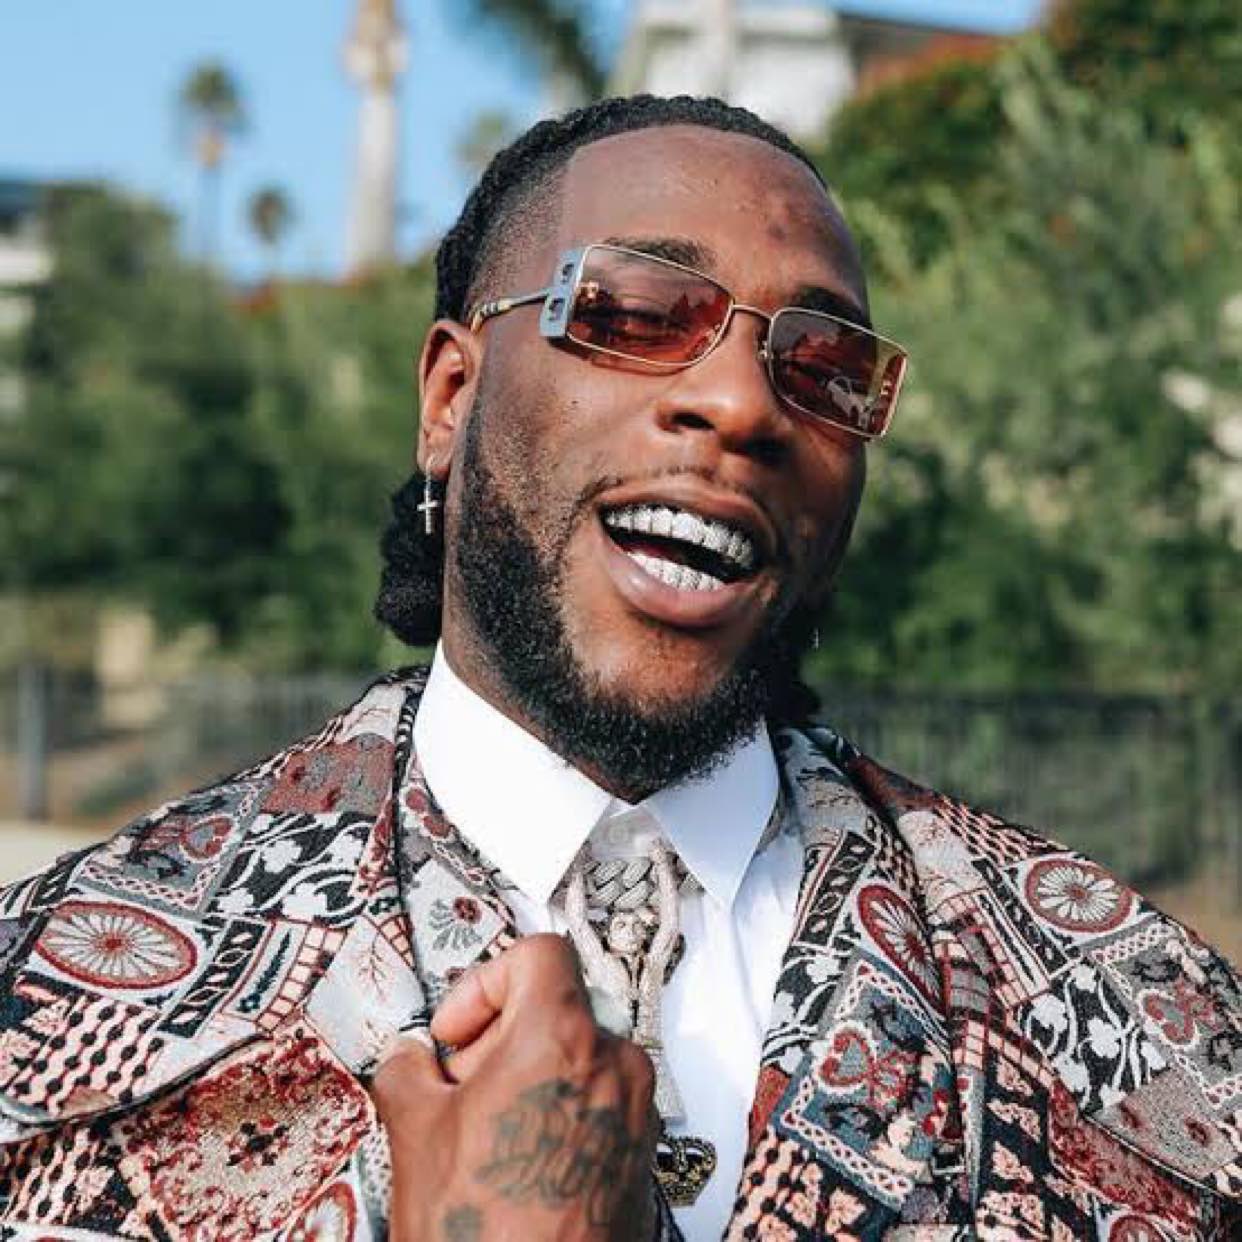 Have You Seen Burna Boy’s Response To The Girl Who Said She Didn’t Know What He Looks Like?